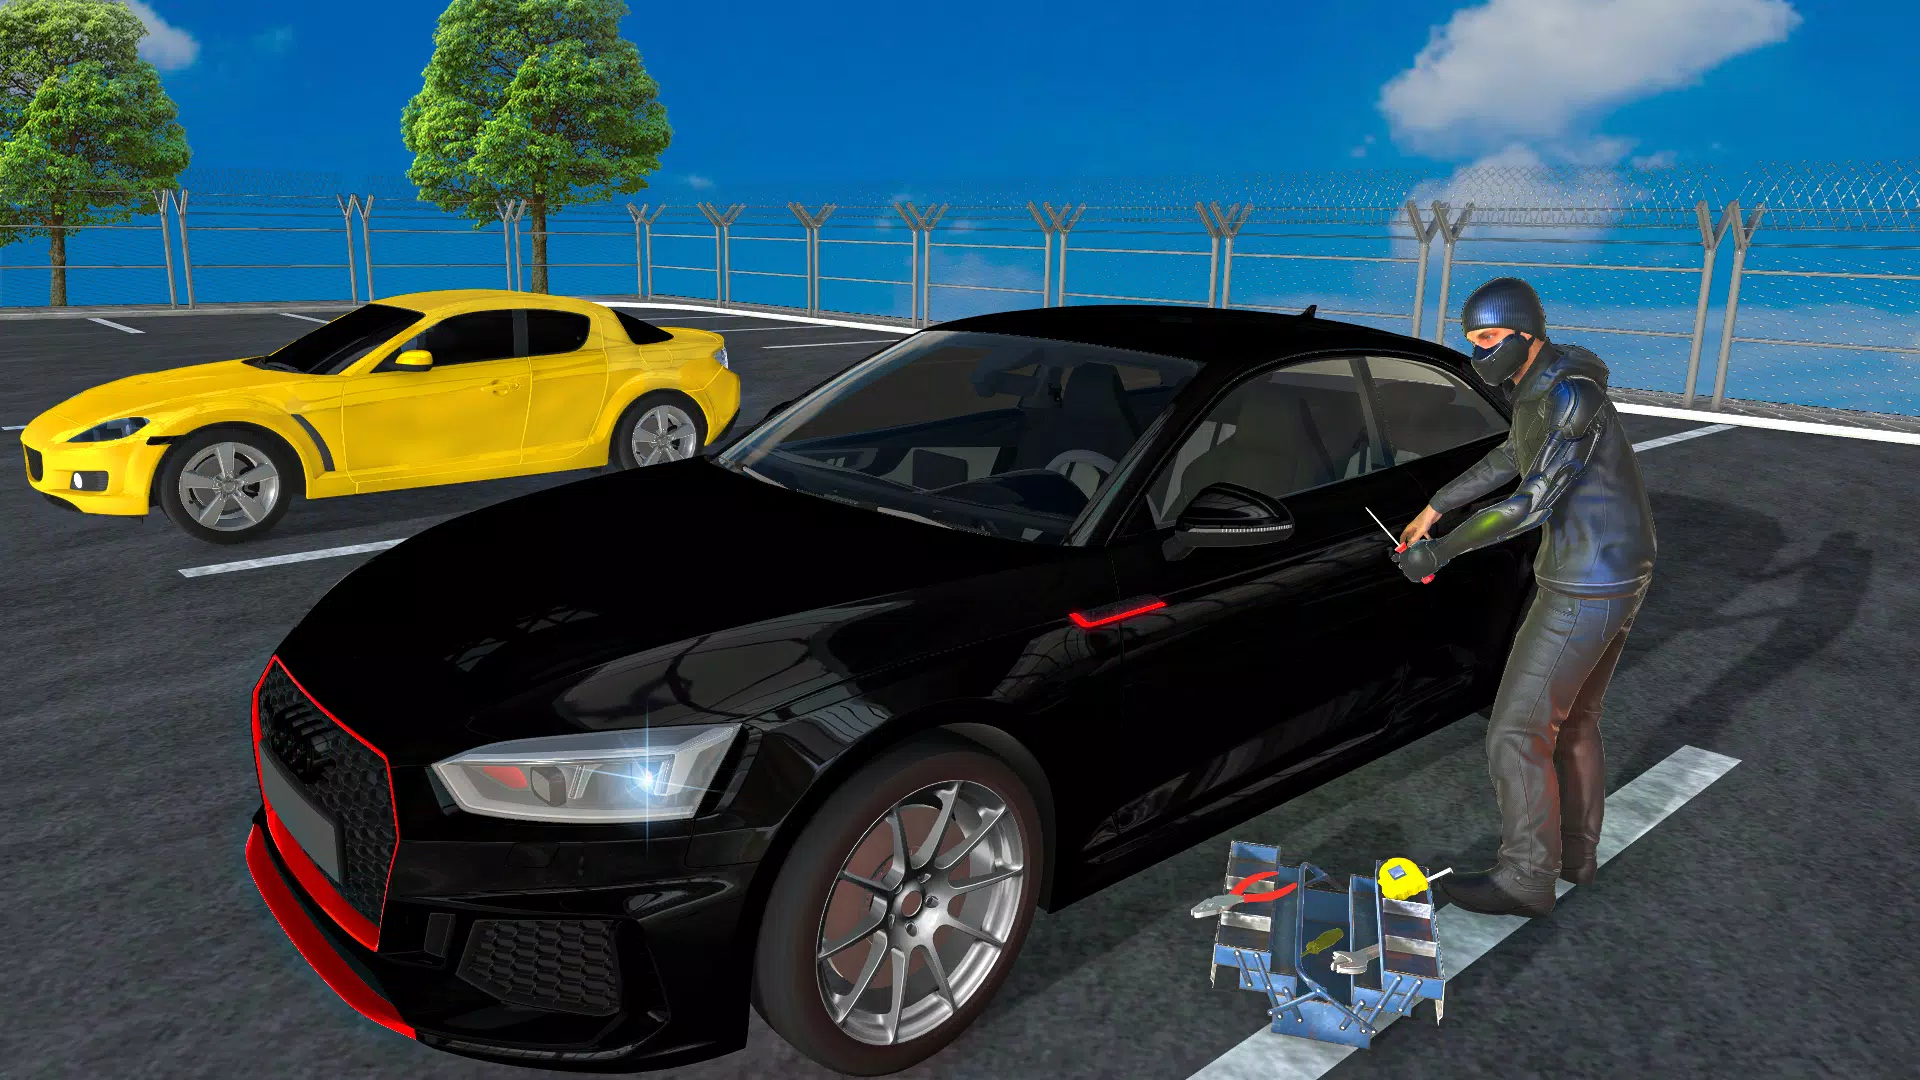 Robbery Offline Game- Thief and Robbery Simulator APK para Android